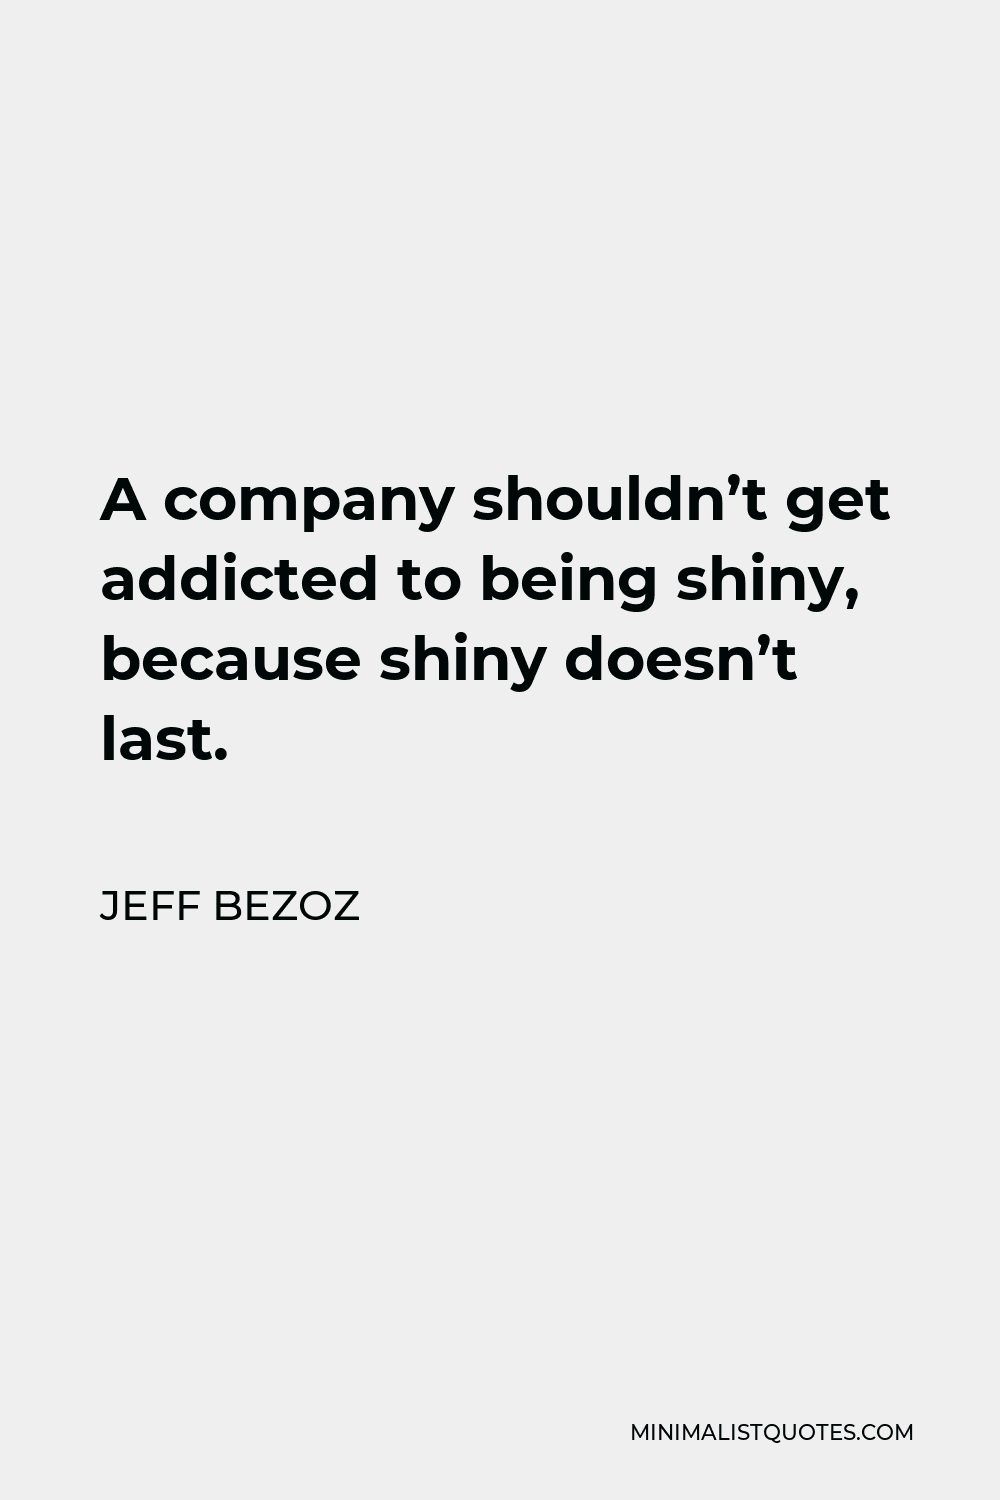 Jeff Bezoz Quote - A company shouldn’t get addicted to being shiny, because shiny doesn’t last.